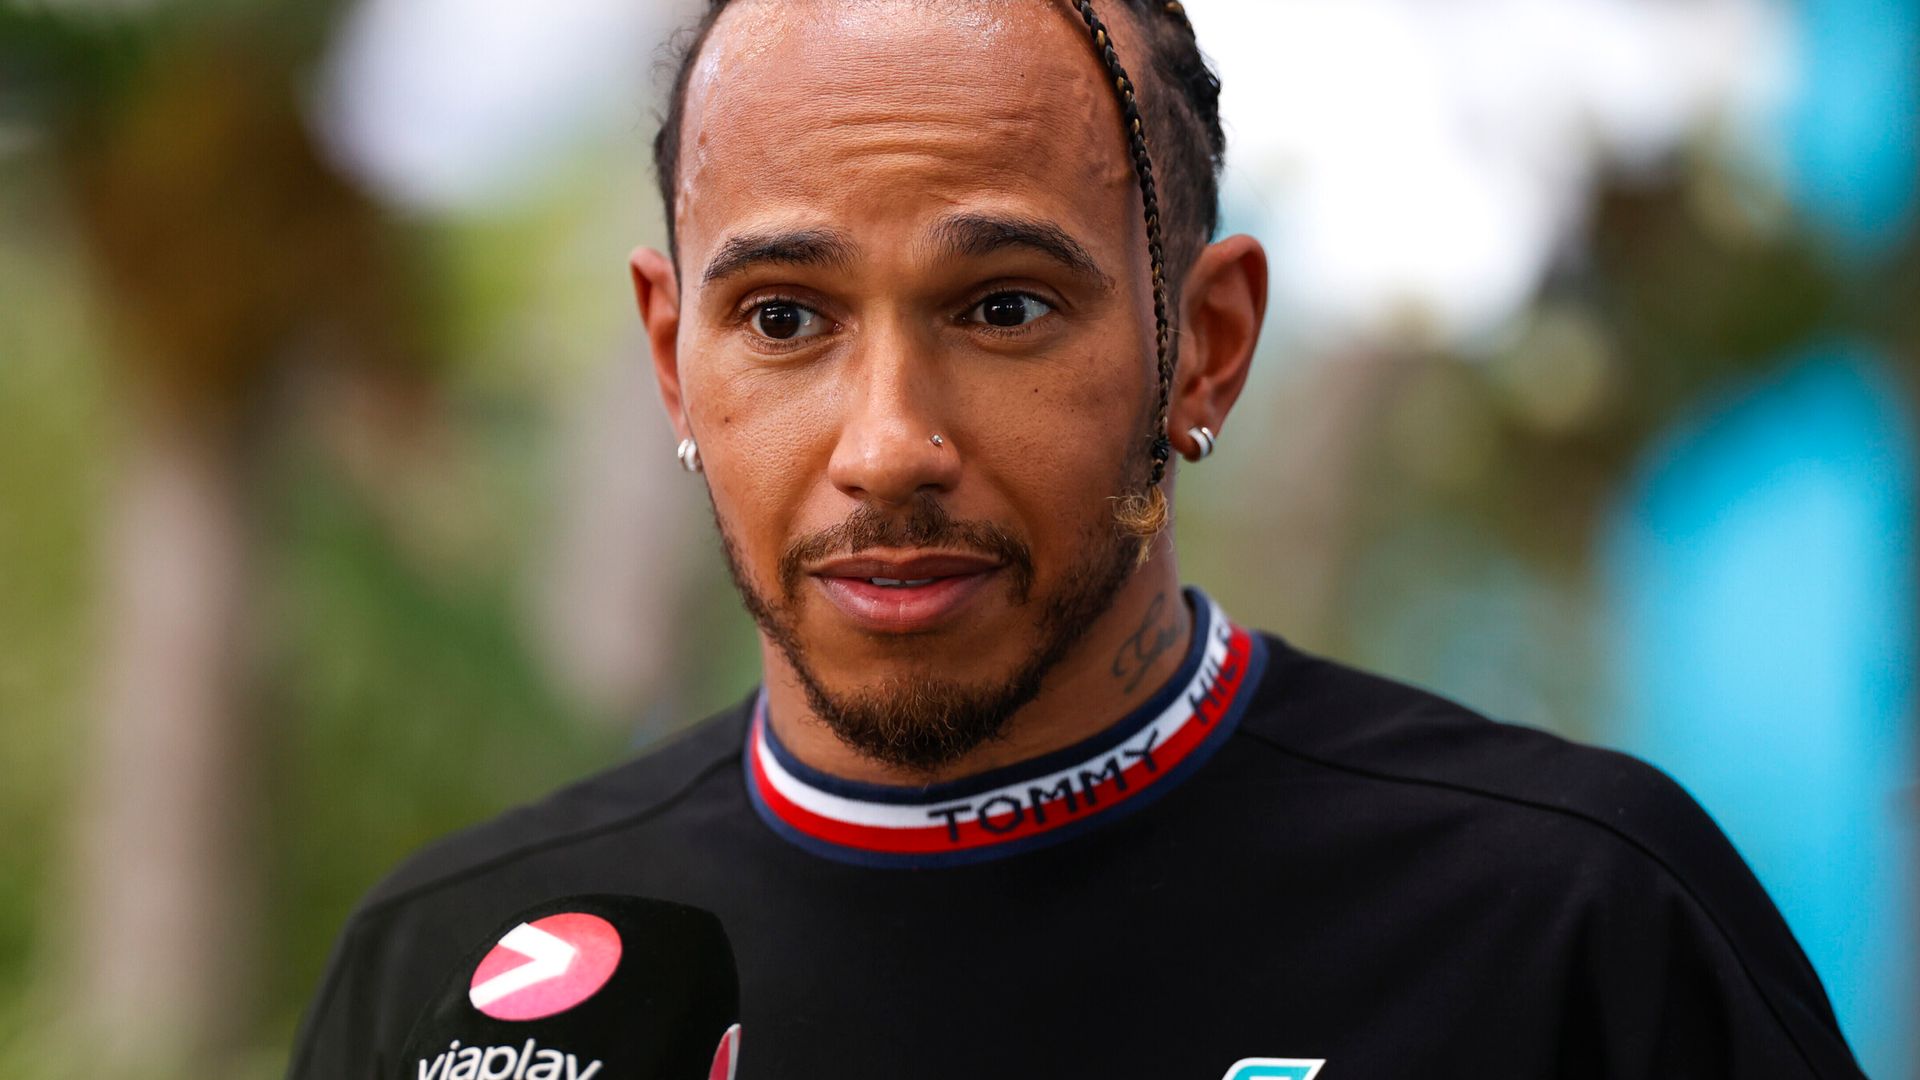 Hamilton unlikely to face sanction over piercings at Monaco GPSkySports | Information